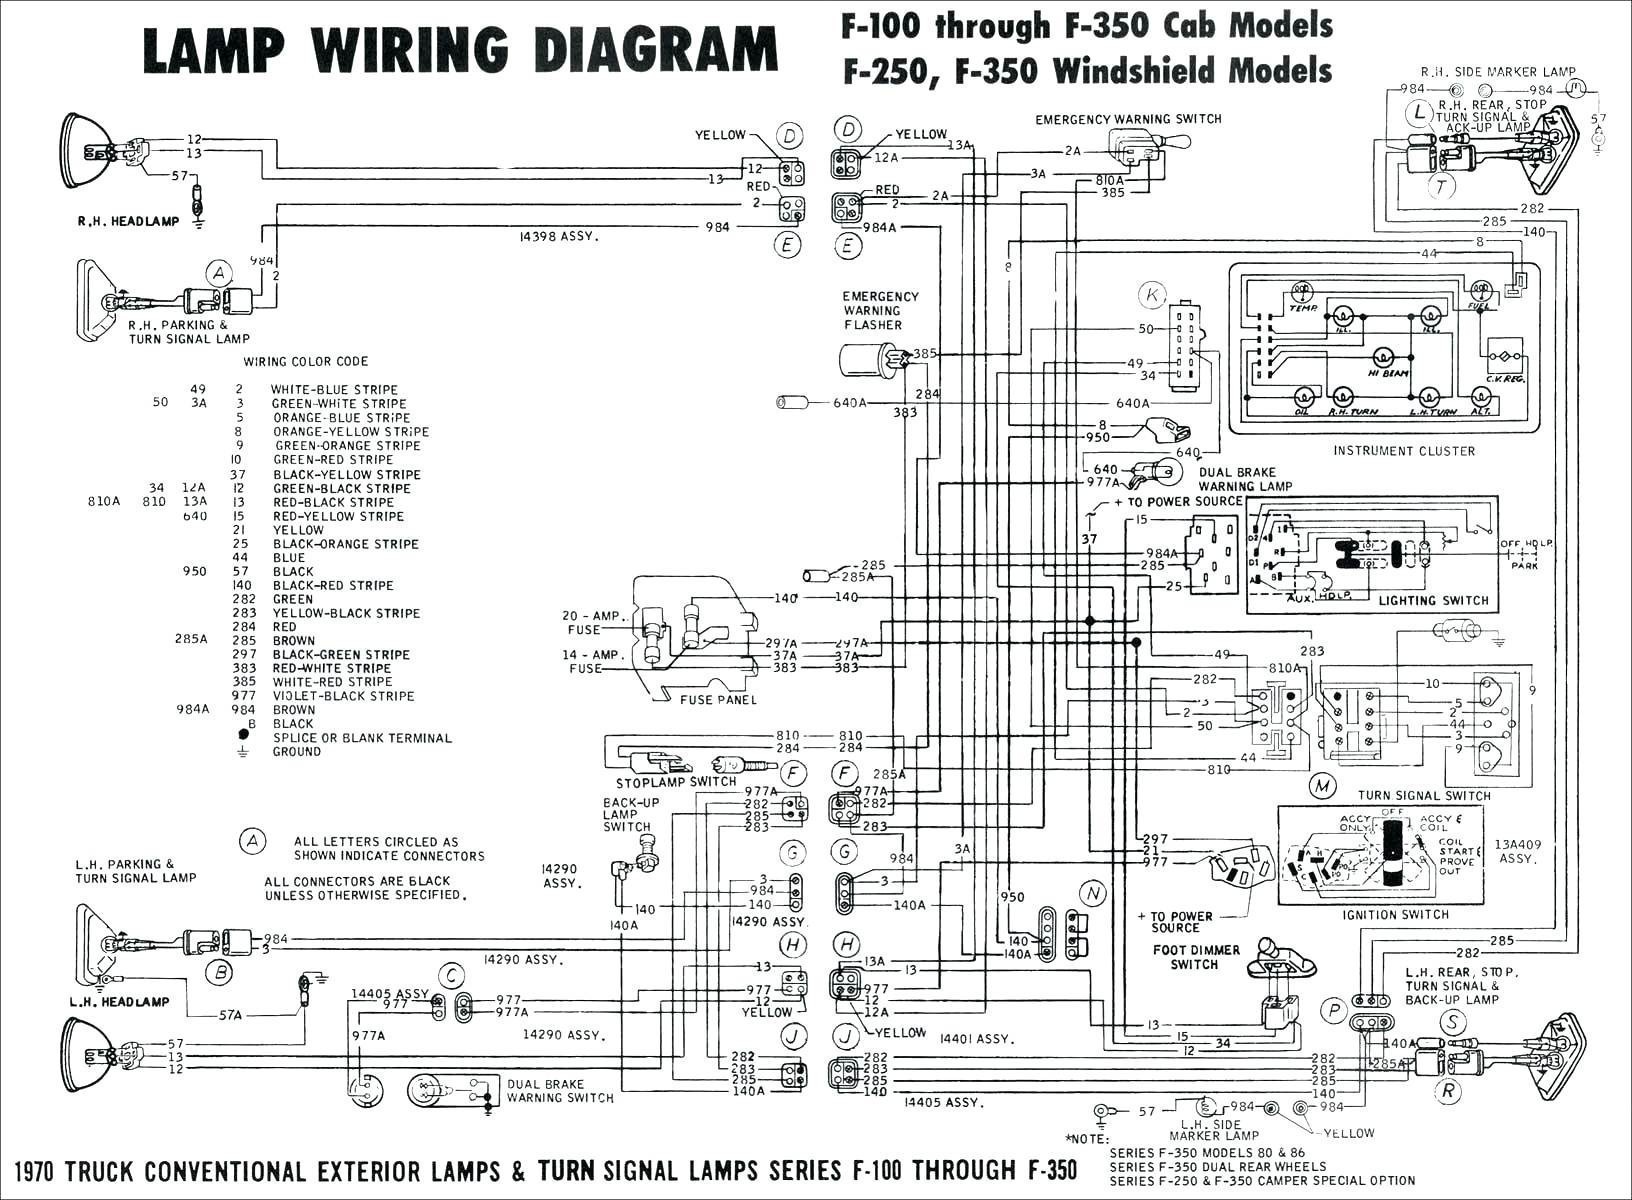 Basic Ignition System Wiring Diagram New 2002 Jeep Grand Cherokee Ignition Wiring Diagram Fresh Jeep Grand